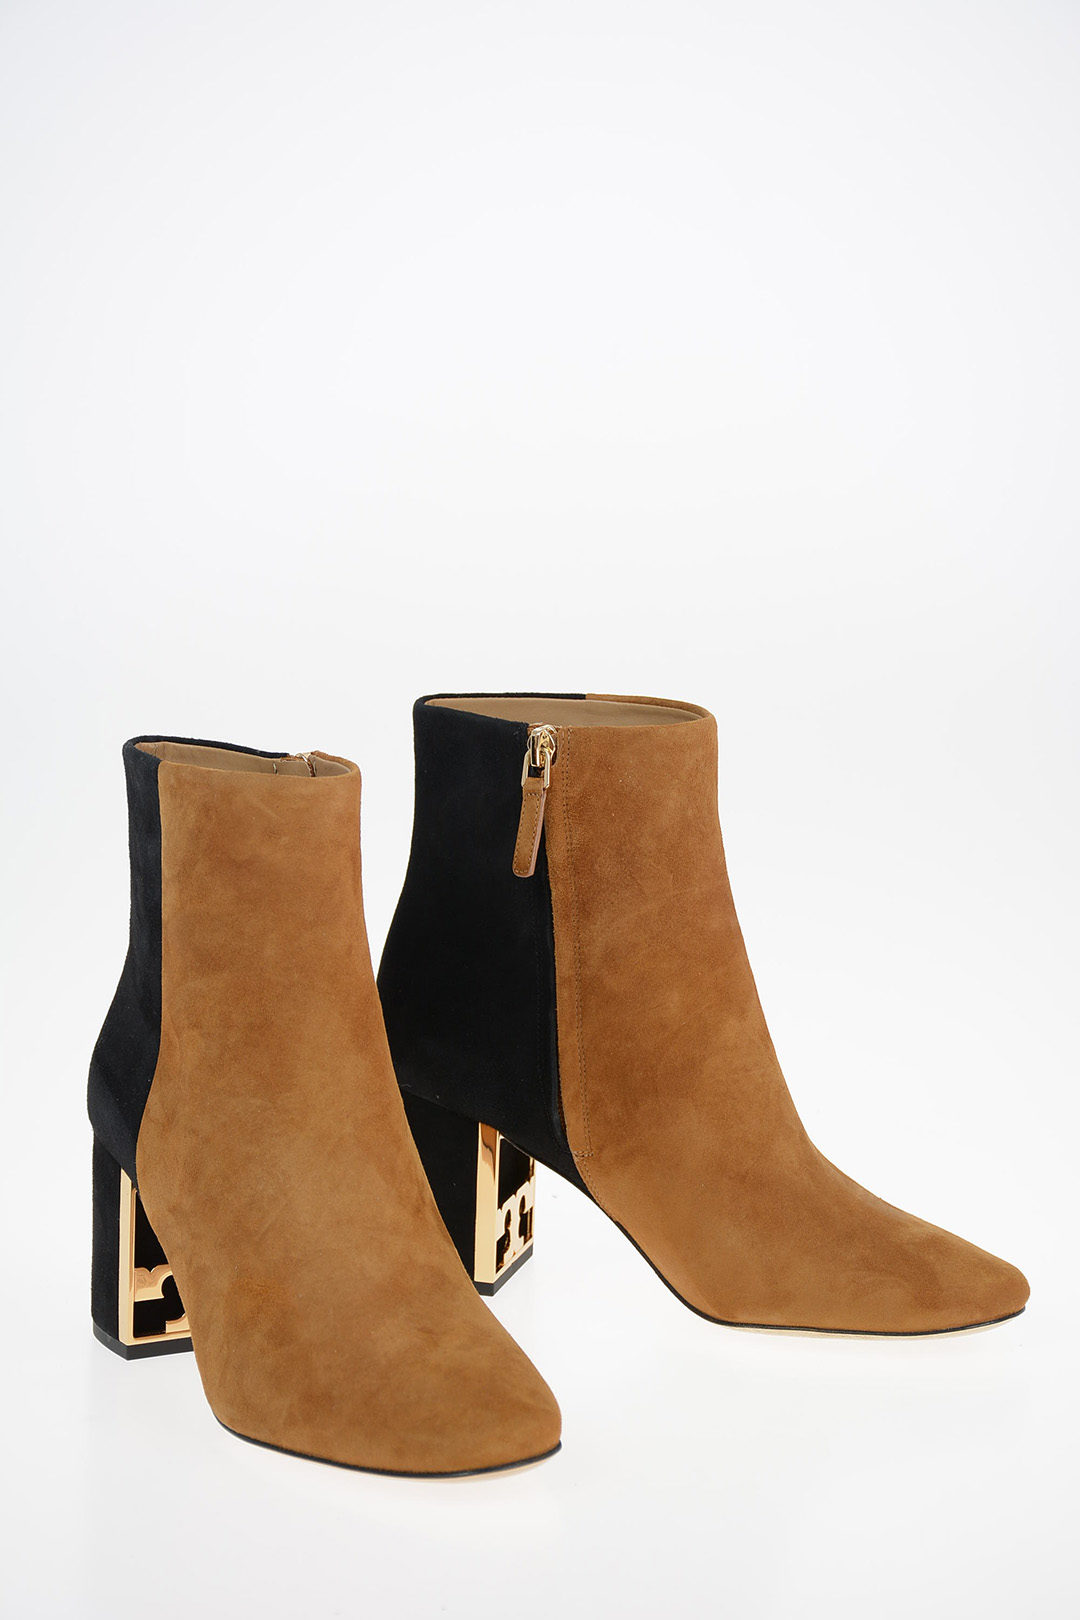 Tory Burch 7cm Suede Leather Two-Tone GIGI Booties women - Glamood Outlet